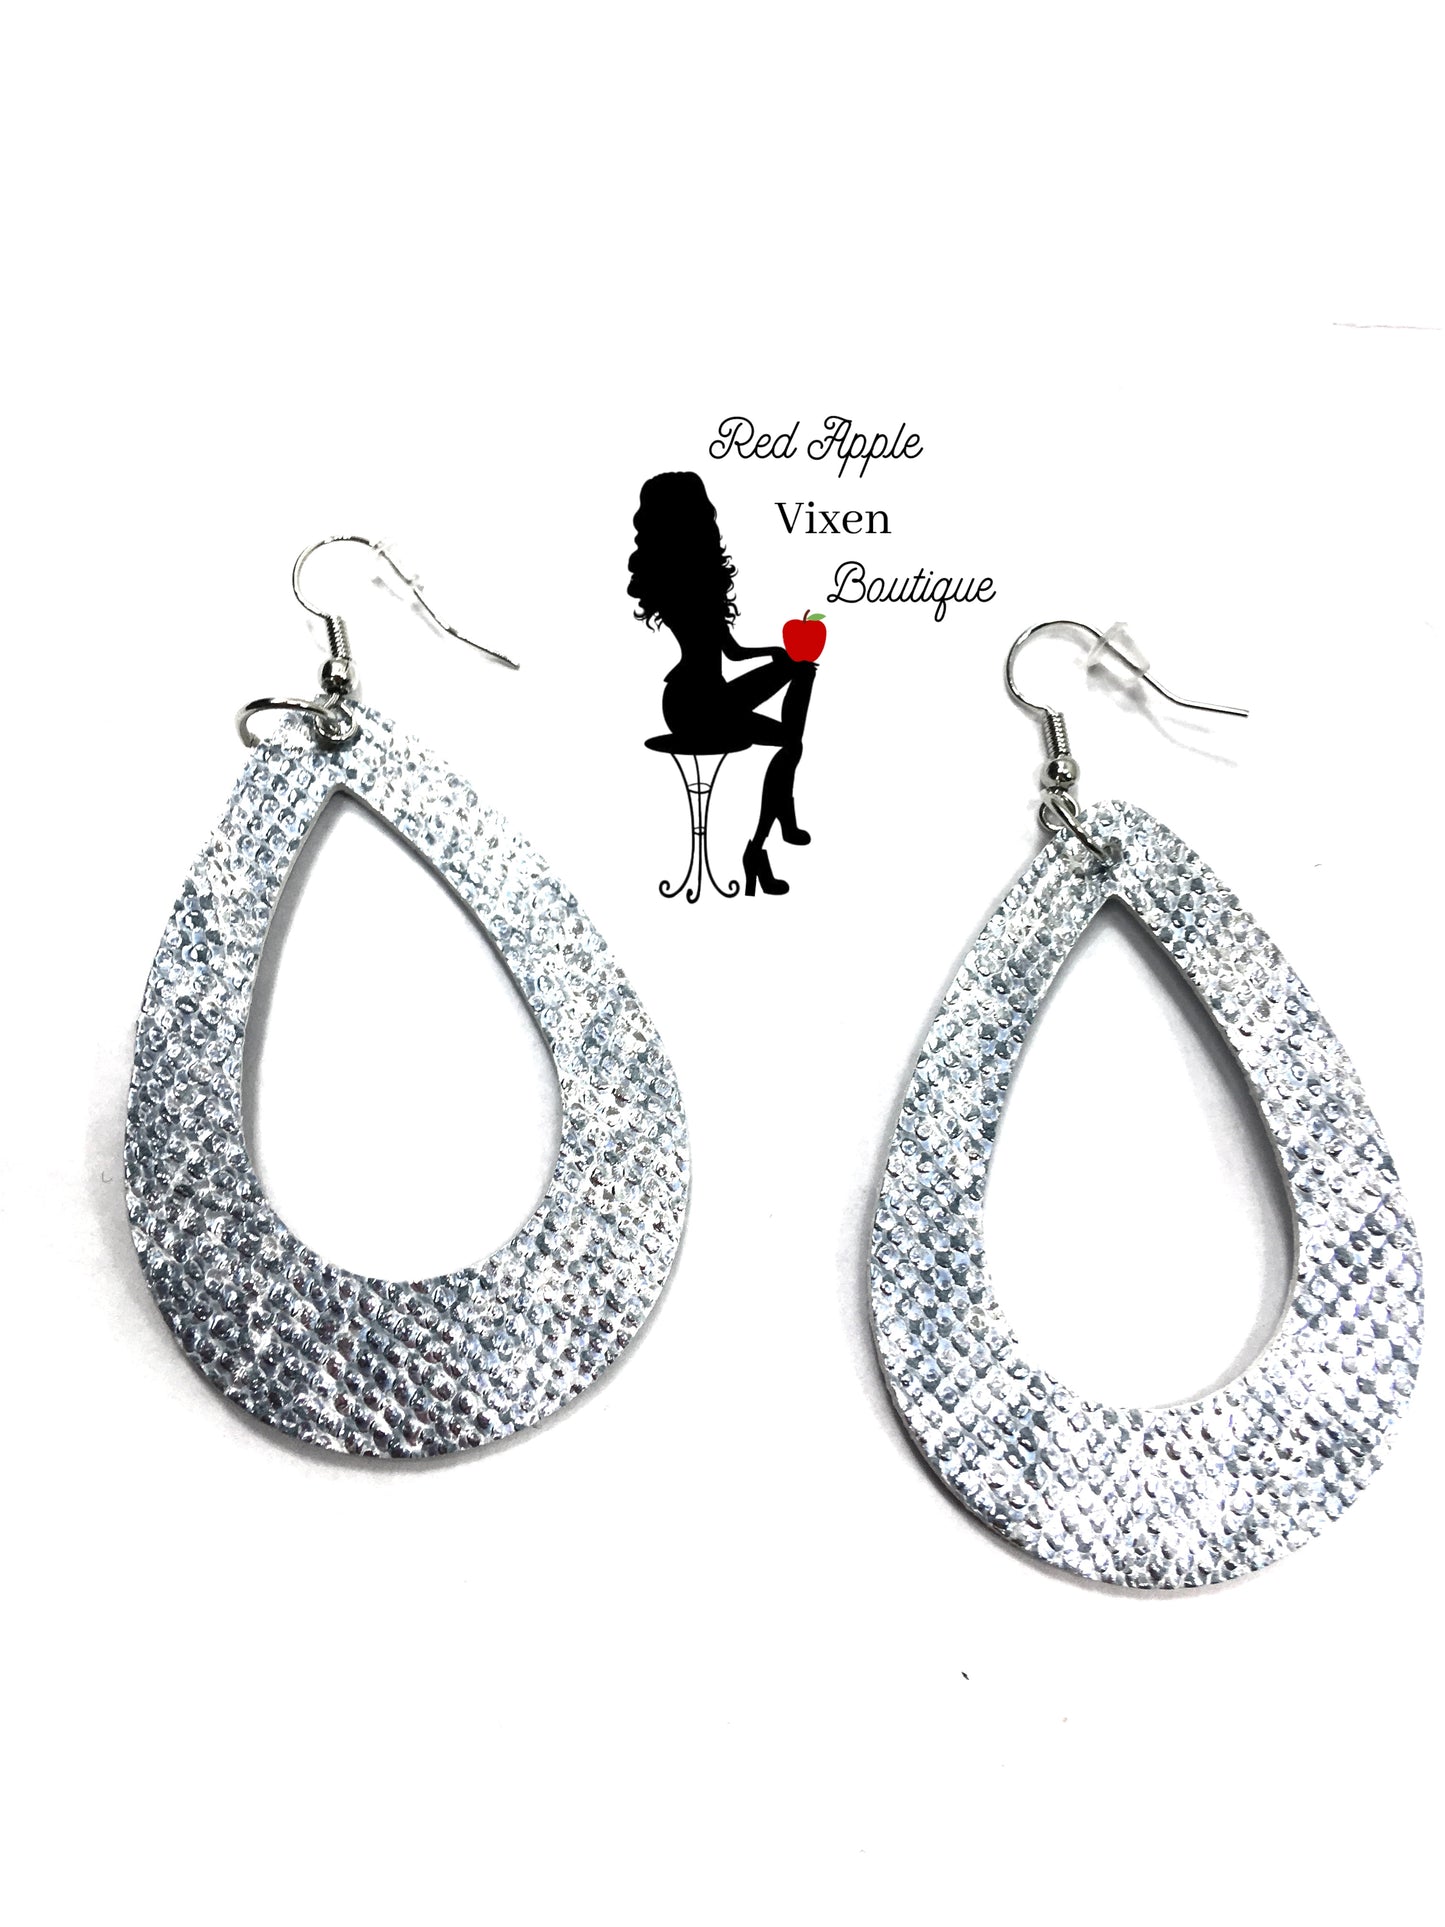 Shiny Silver Snake Skin Print Leather Earrings - Red Apple Vixen Boutique